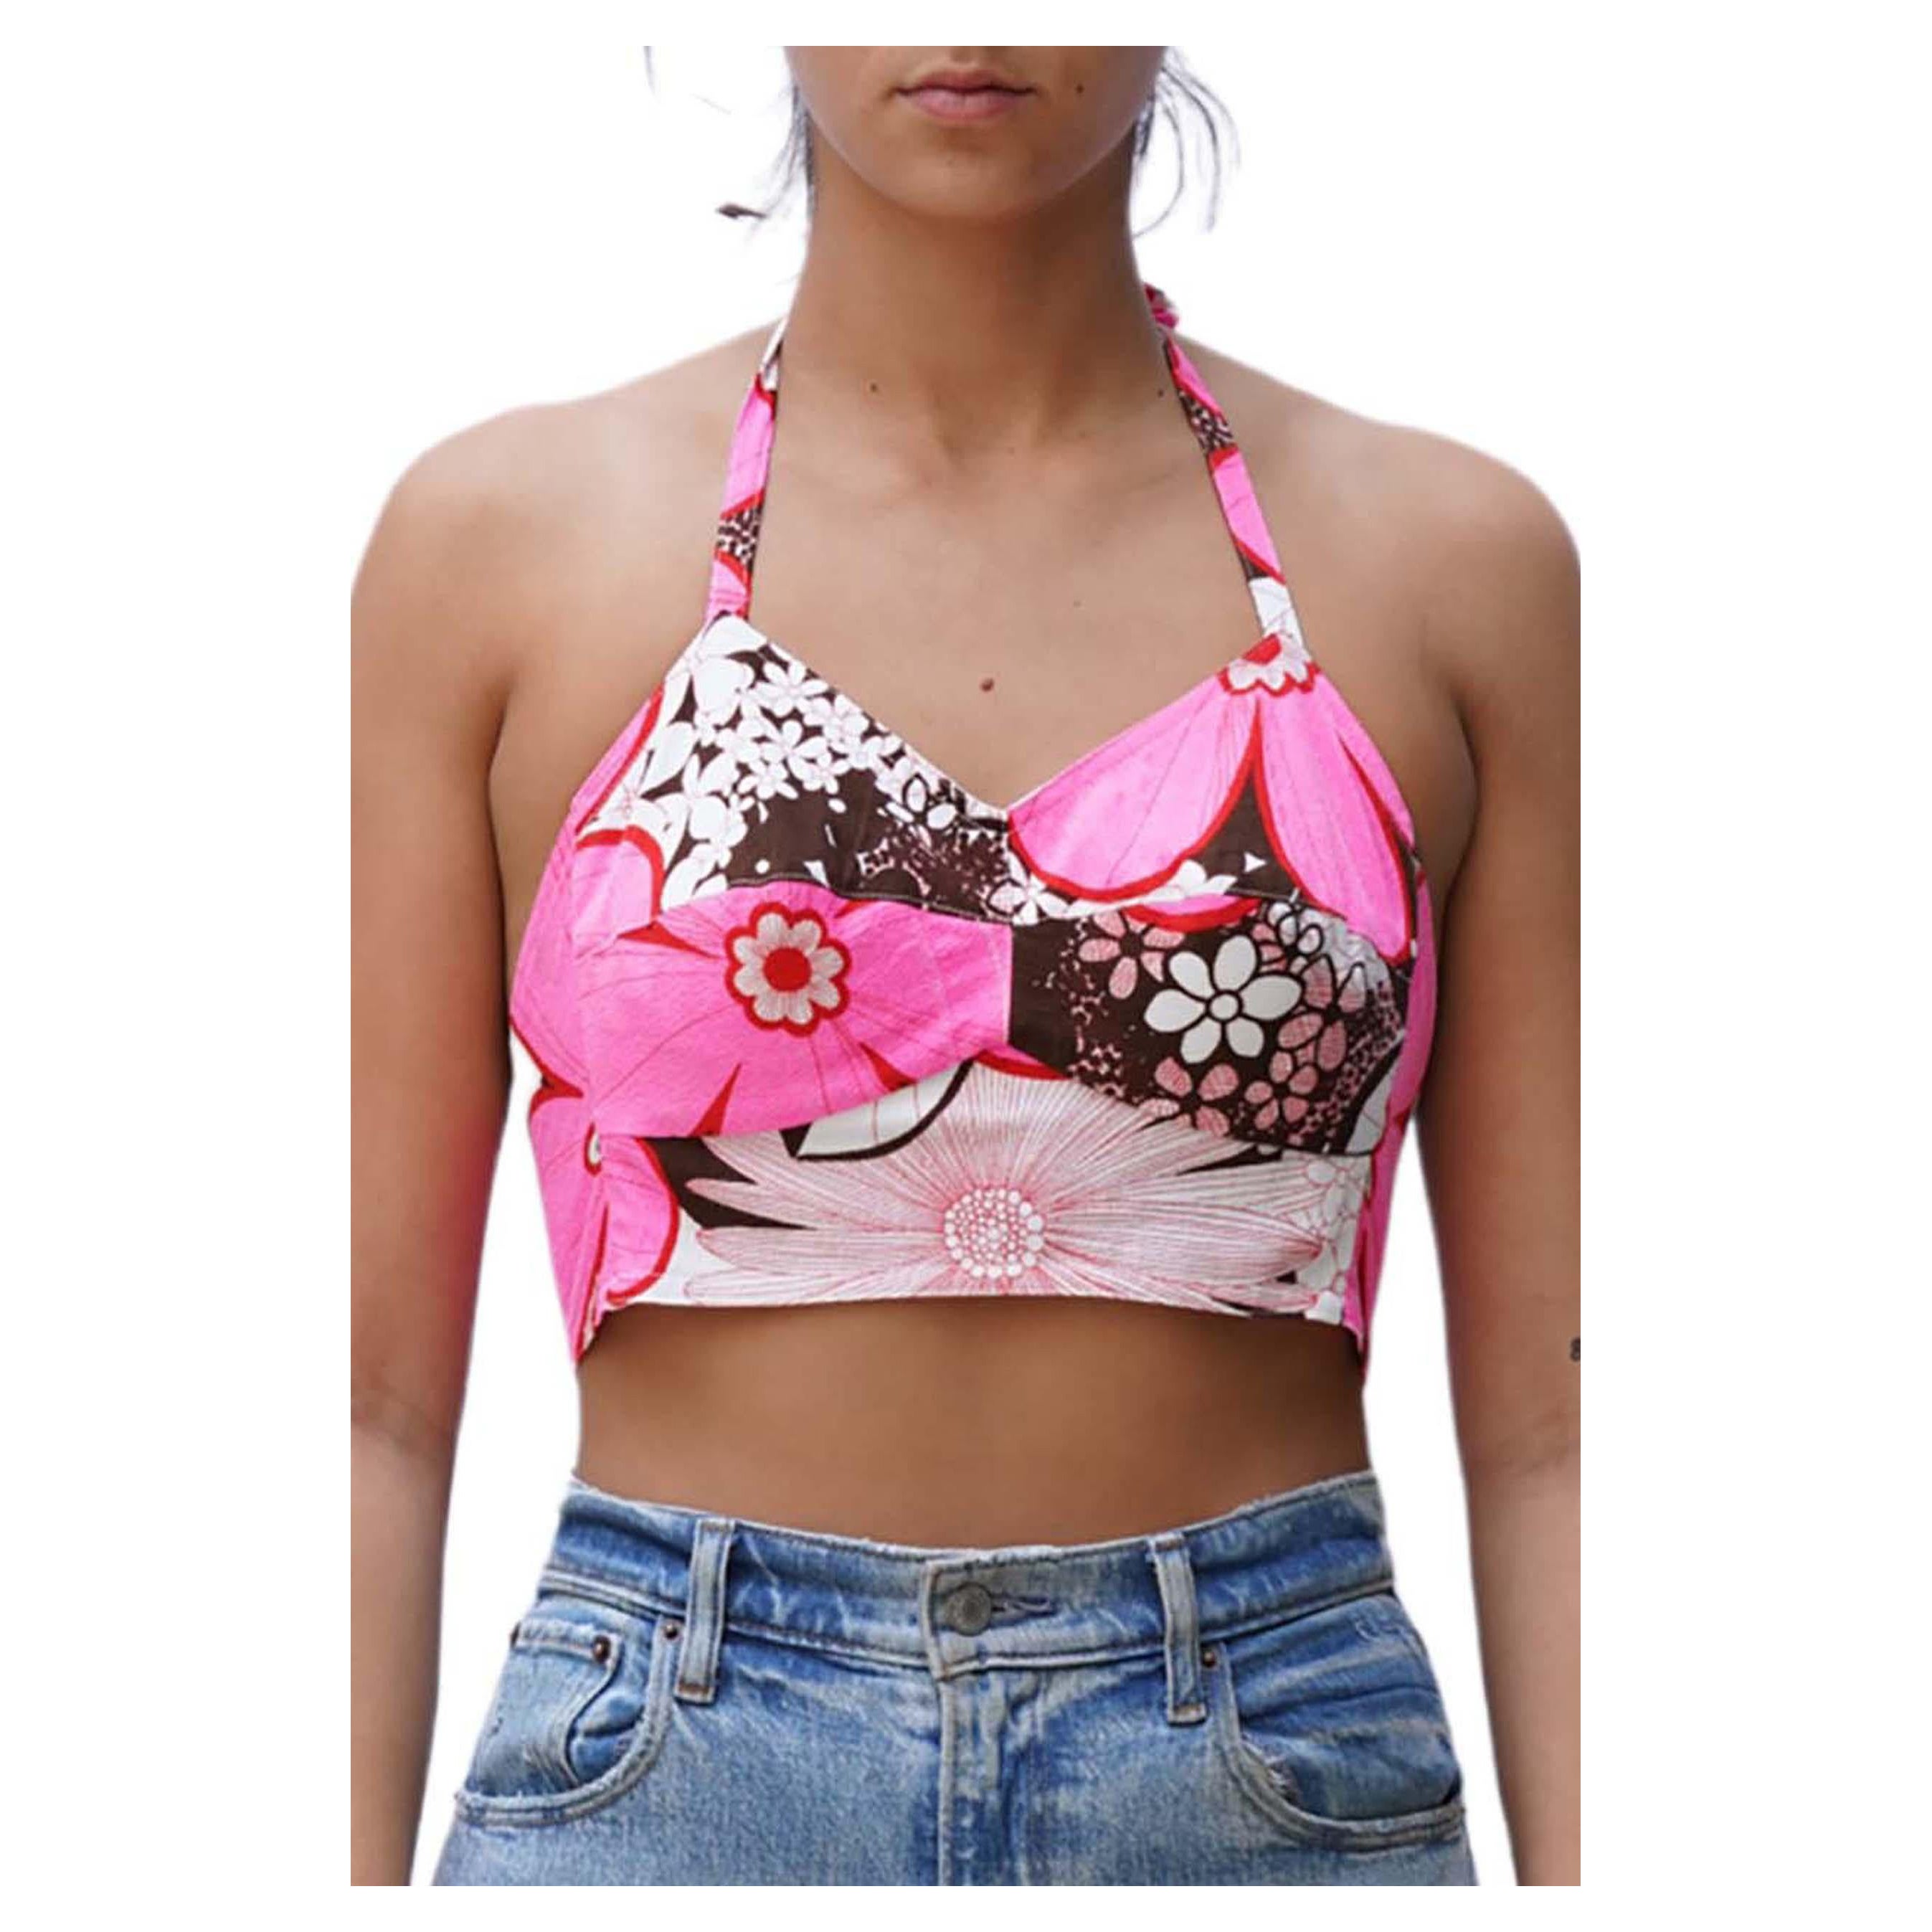 MORPHEW COLLECTION Pink, Brown & White Bustier With Adjustable Straps For Sale